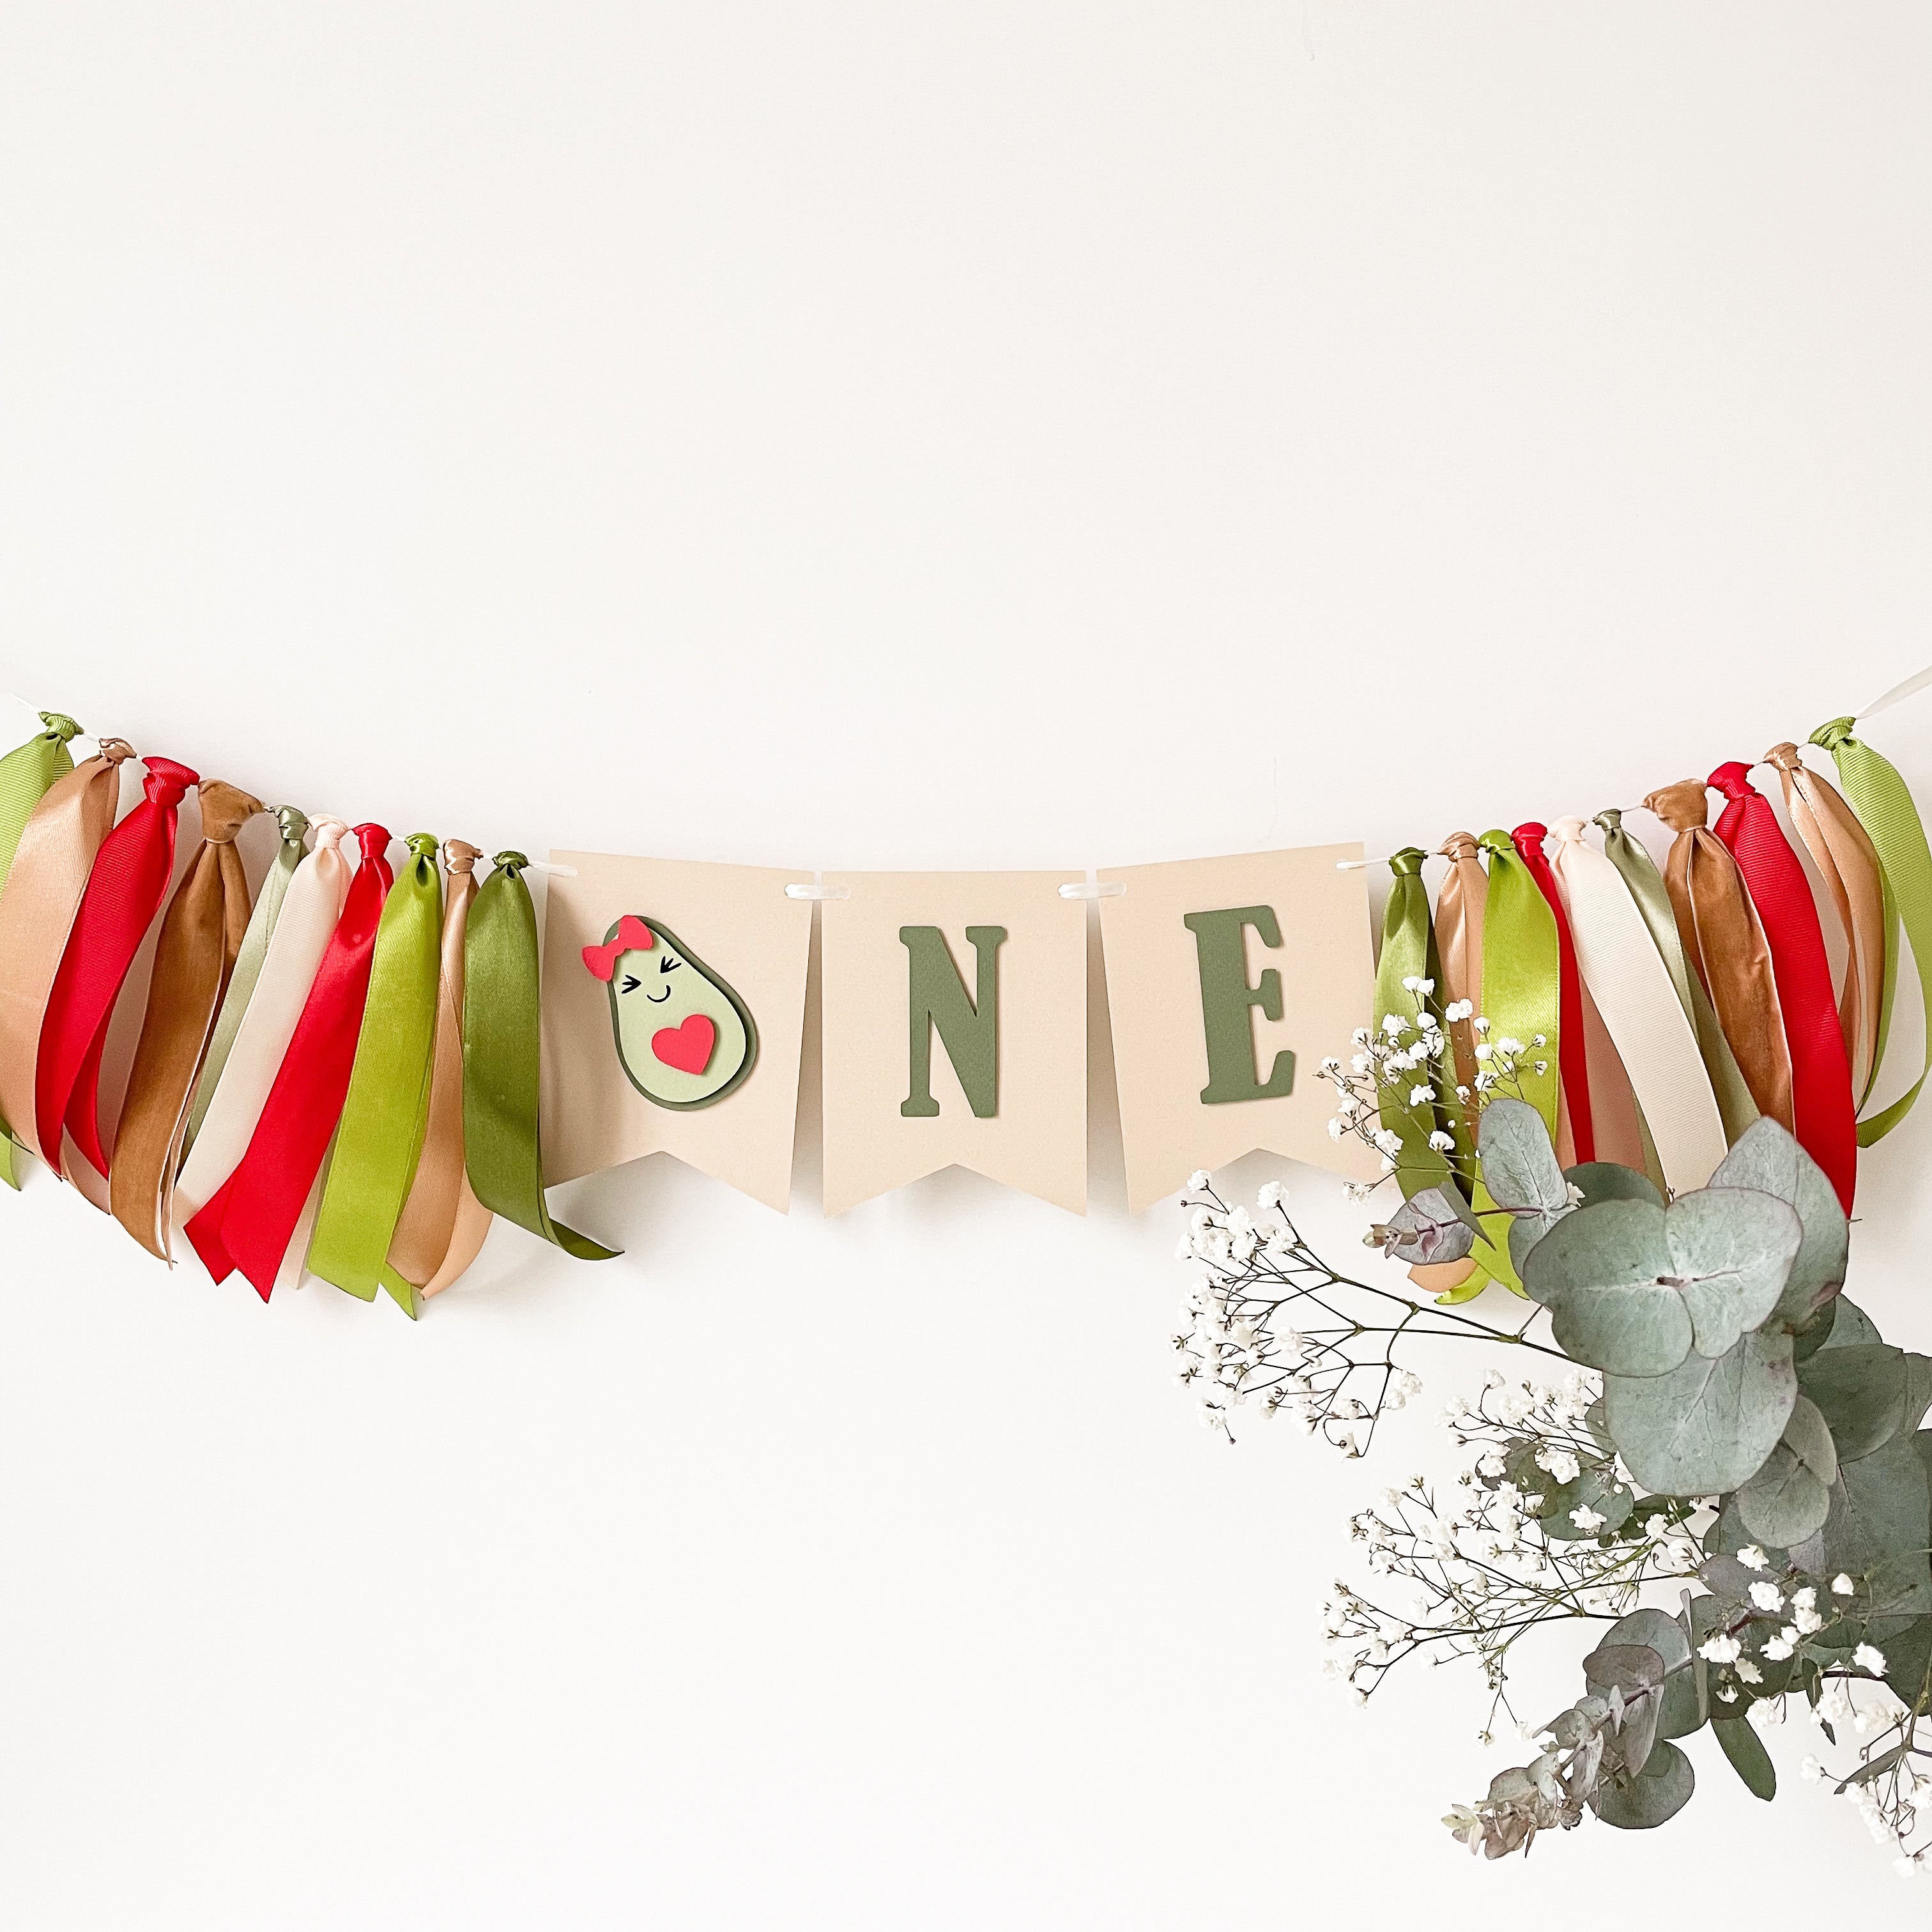 Avocado Girl Sweet Heart  One High Chair Banner Fiesta 1st Birthday Decorations by funstacraft